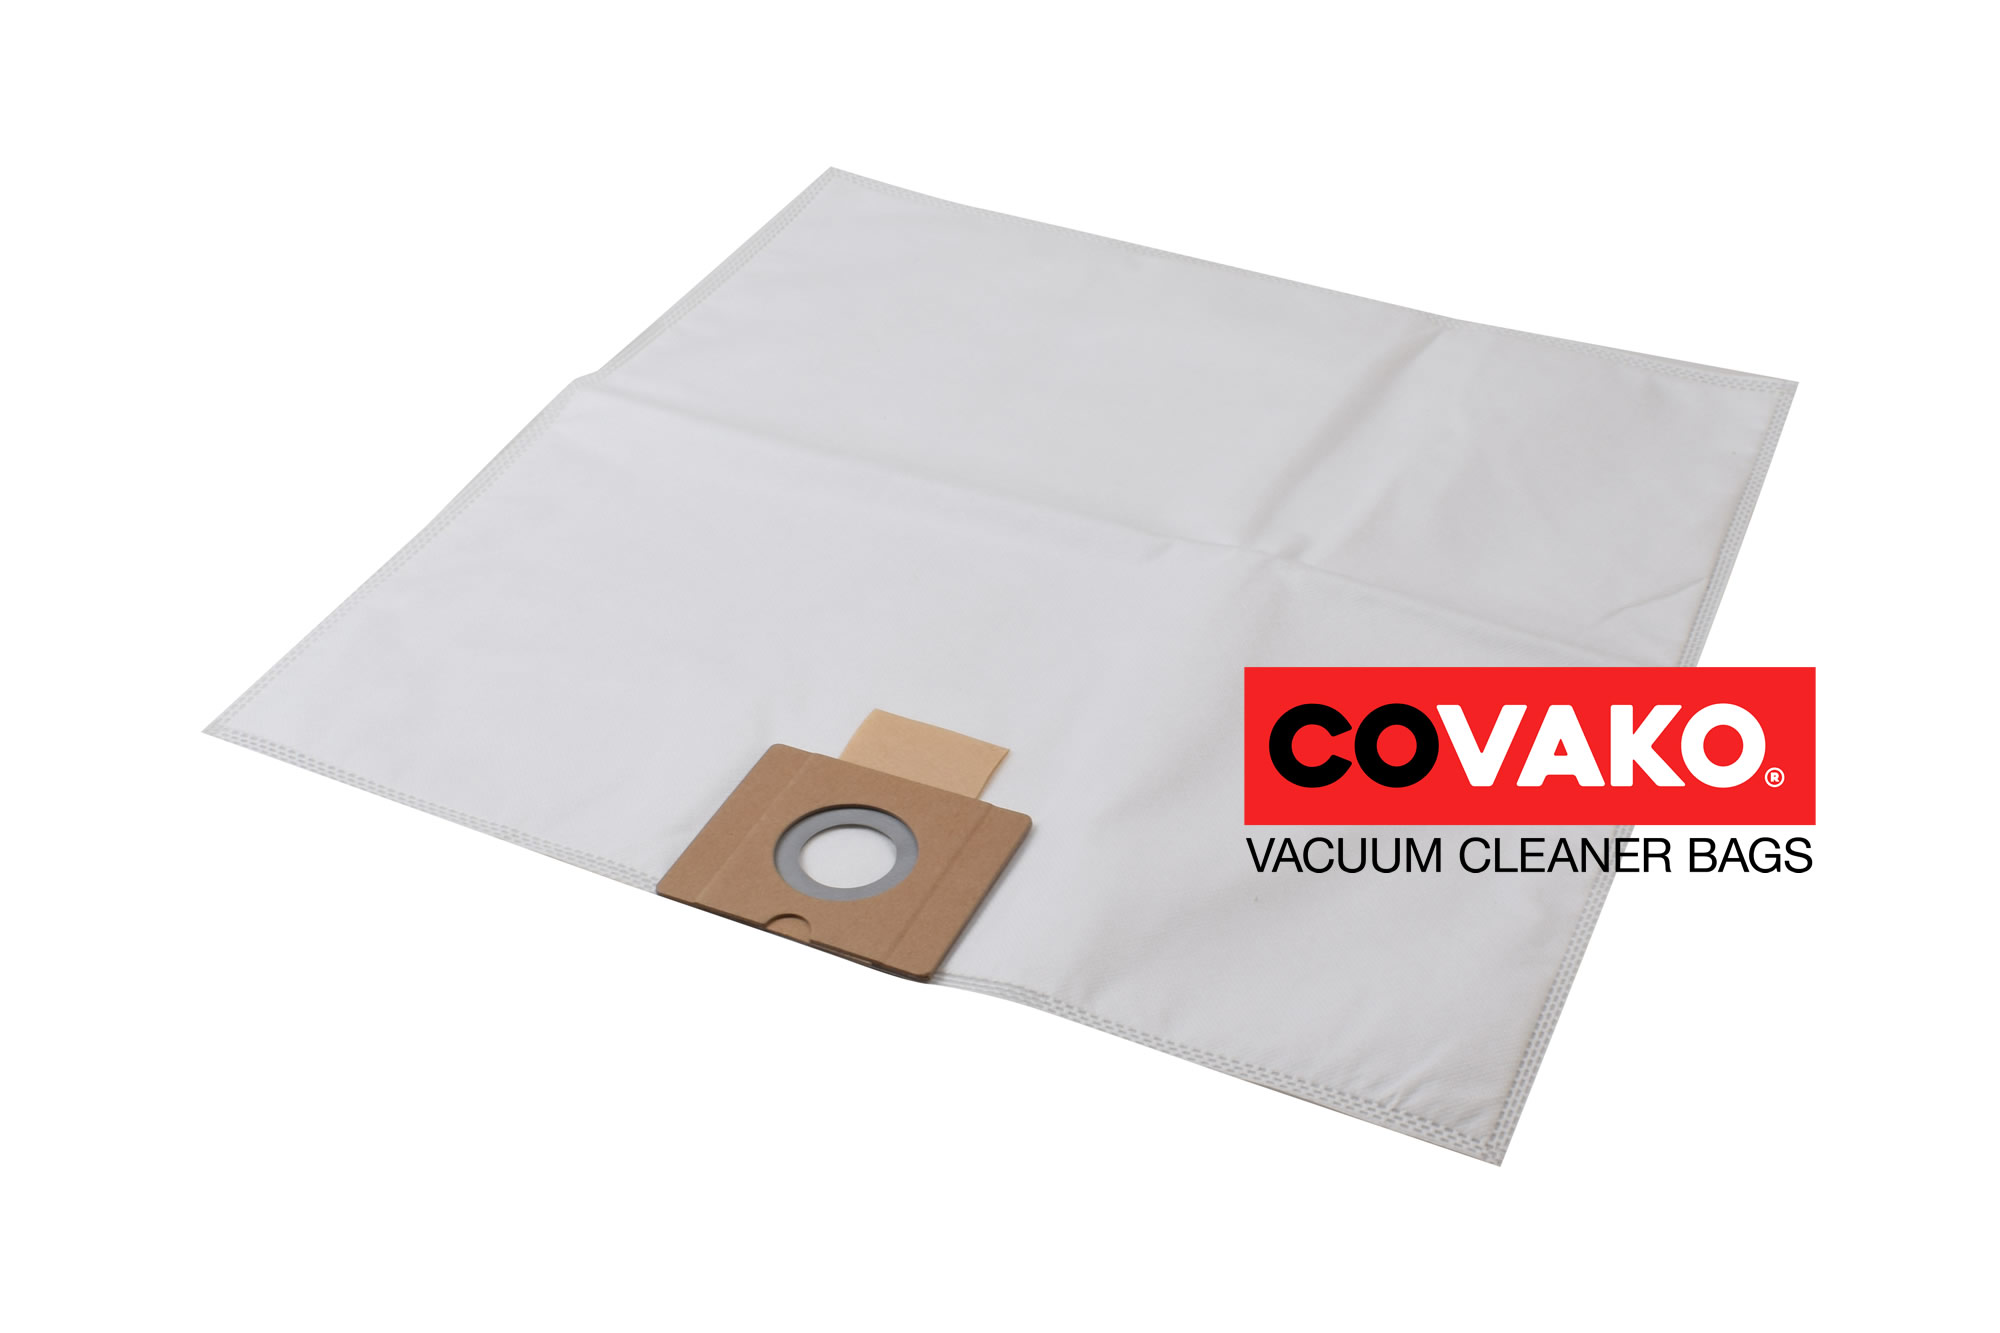 I-vac Cube / Synthesis - I-vac vacuum cleaner bags